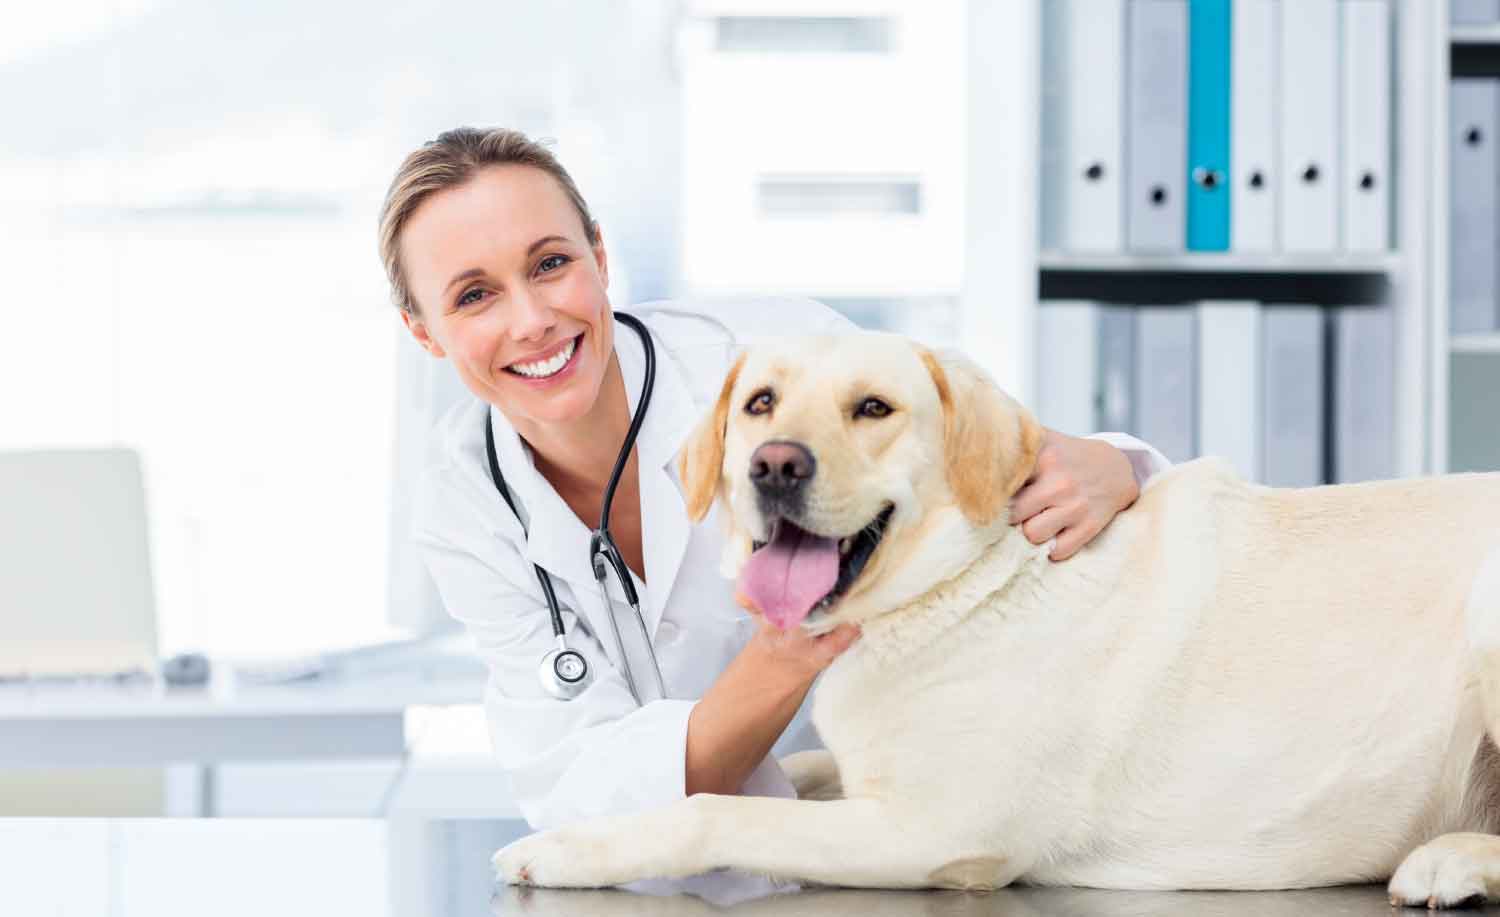 A veterinarian with a dog smiling while Cetratel Telephone Answering Service takes care of her calls